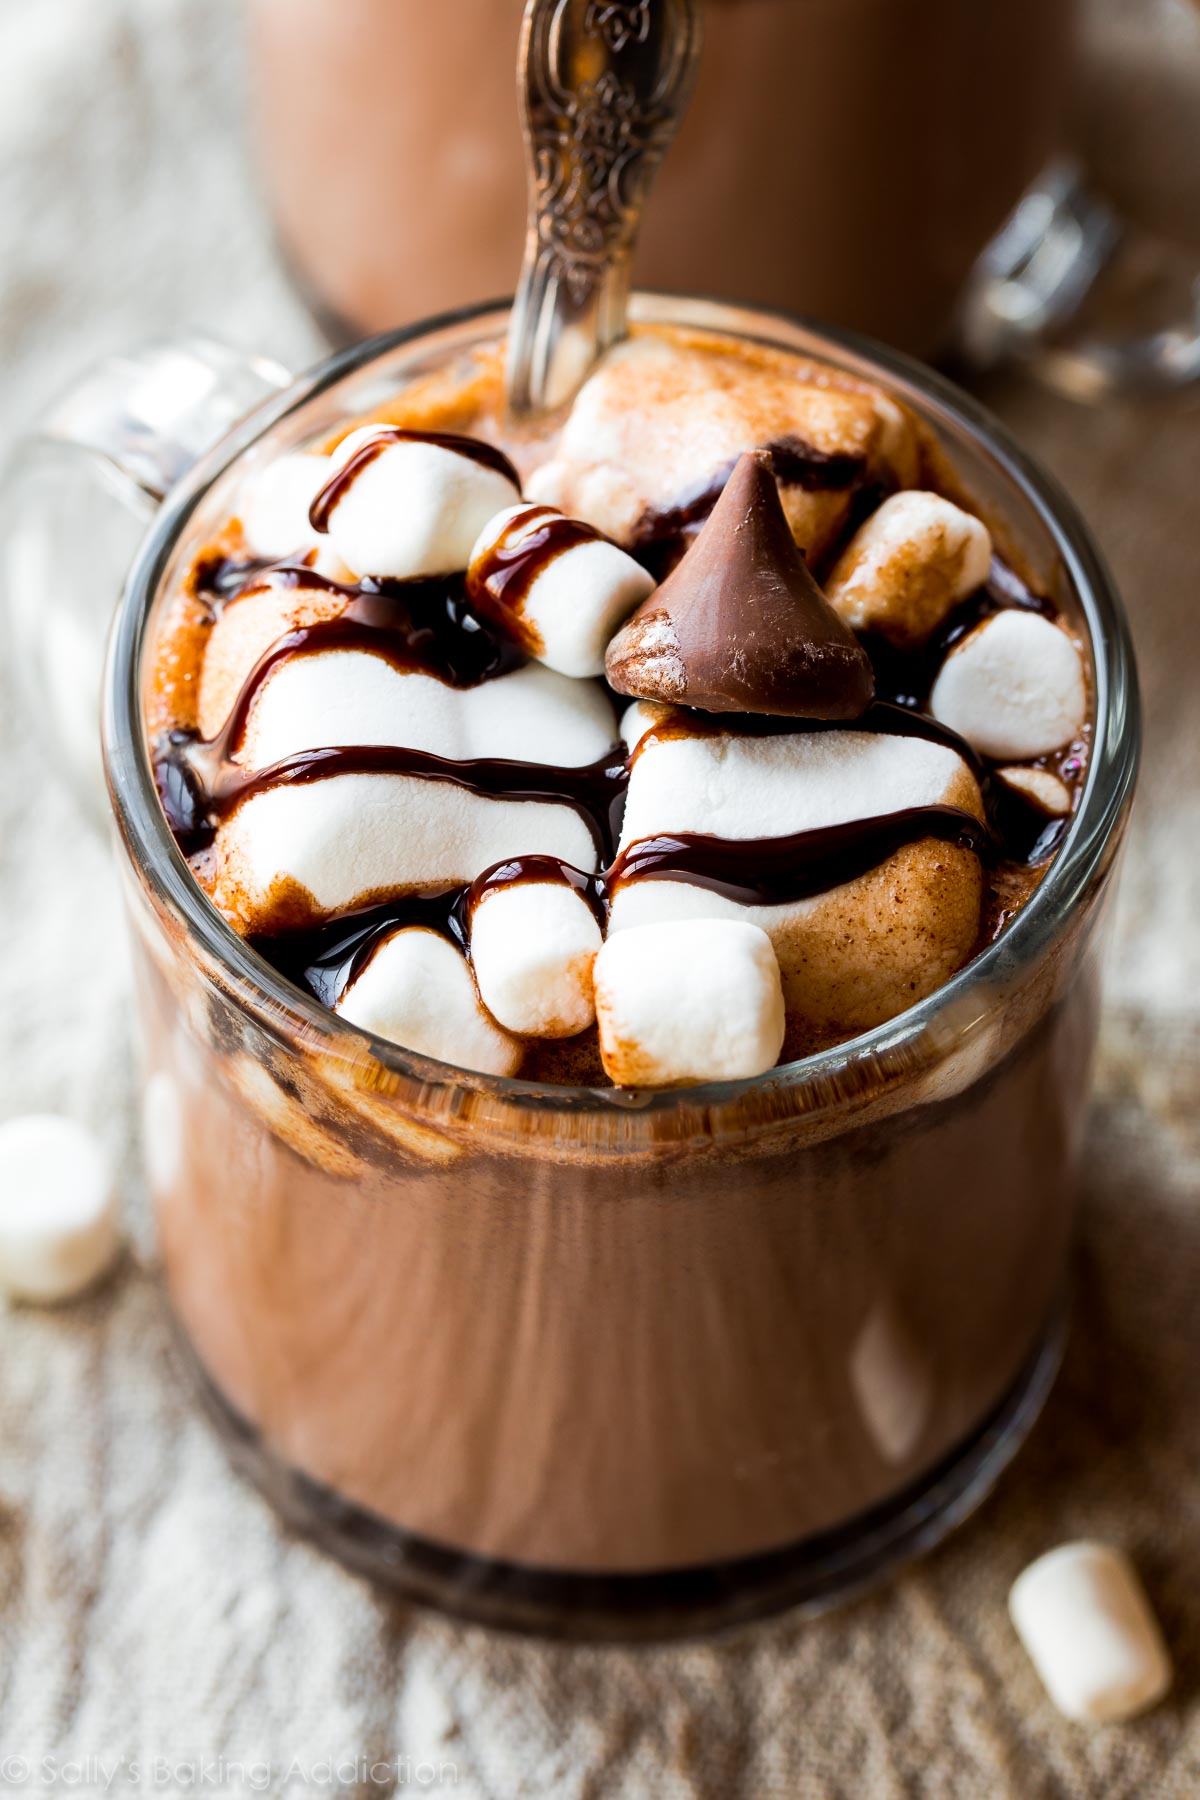 Decadent Slow Cooker Hot Chocolate. Sally's Baking Addiction